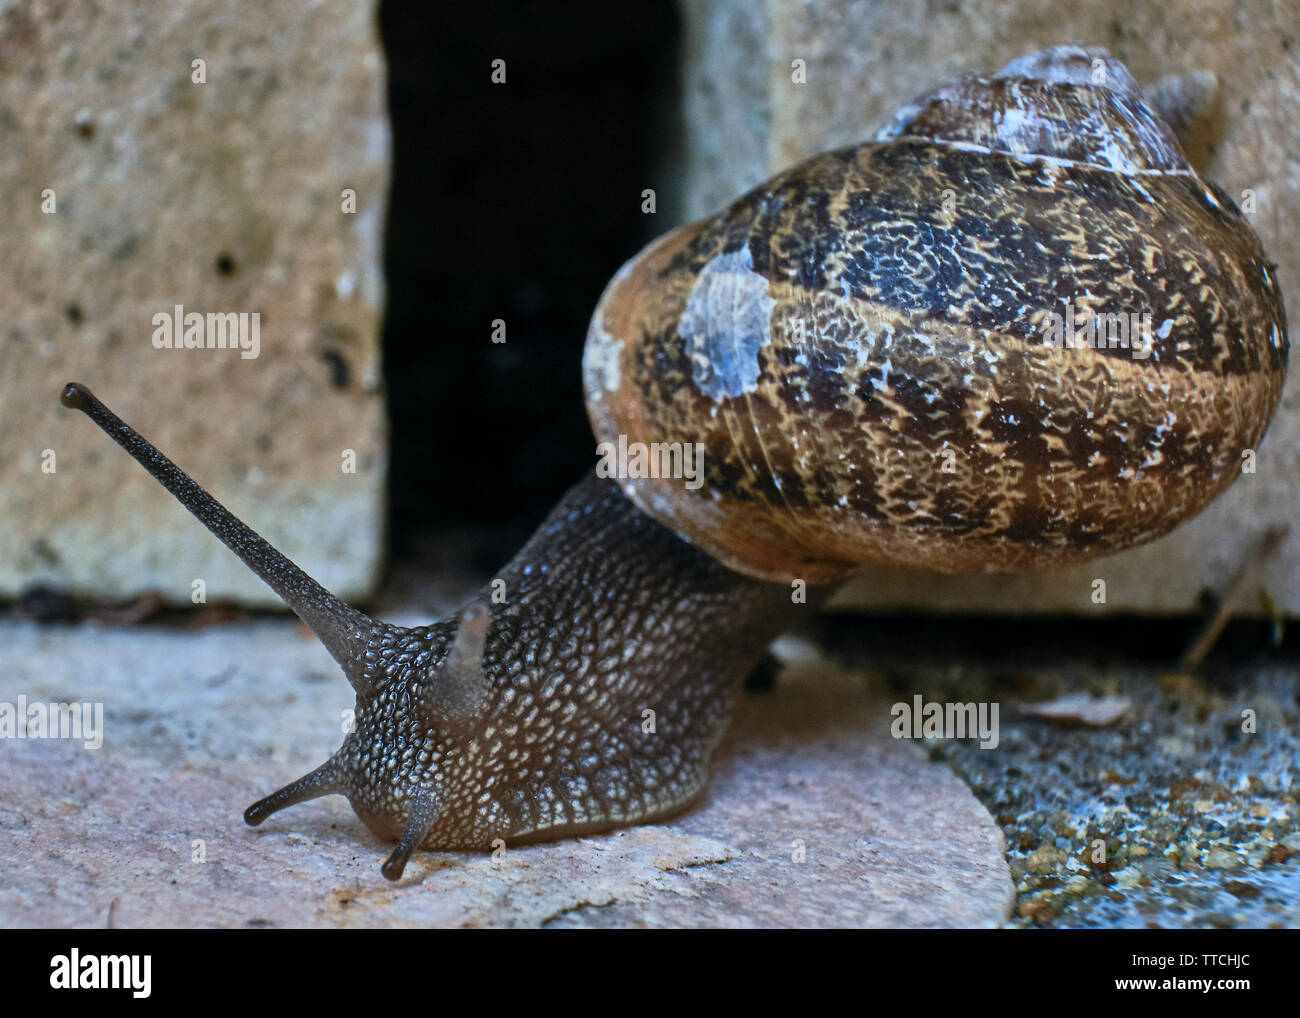 Close up photo of a common garden snail crawling on a stone brick Stock Photo